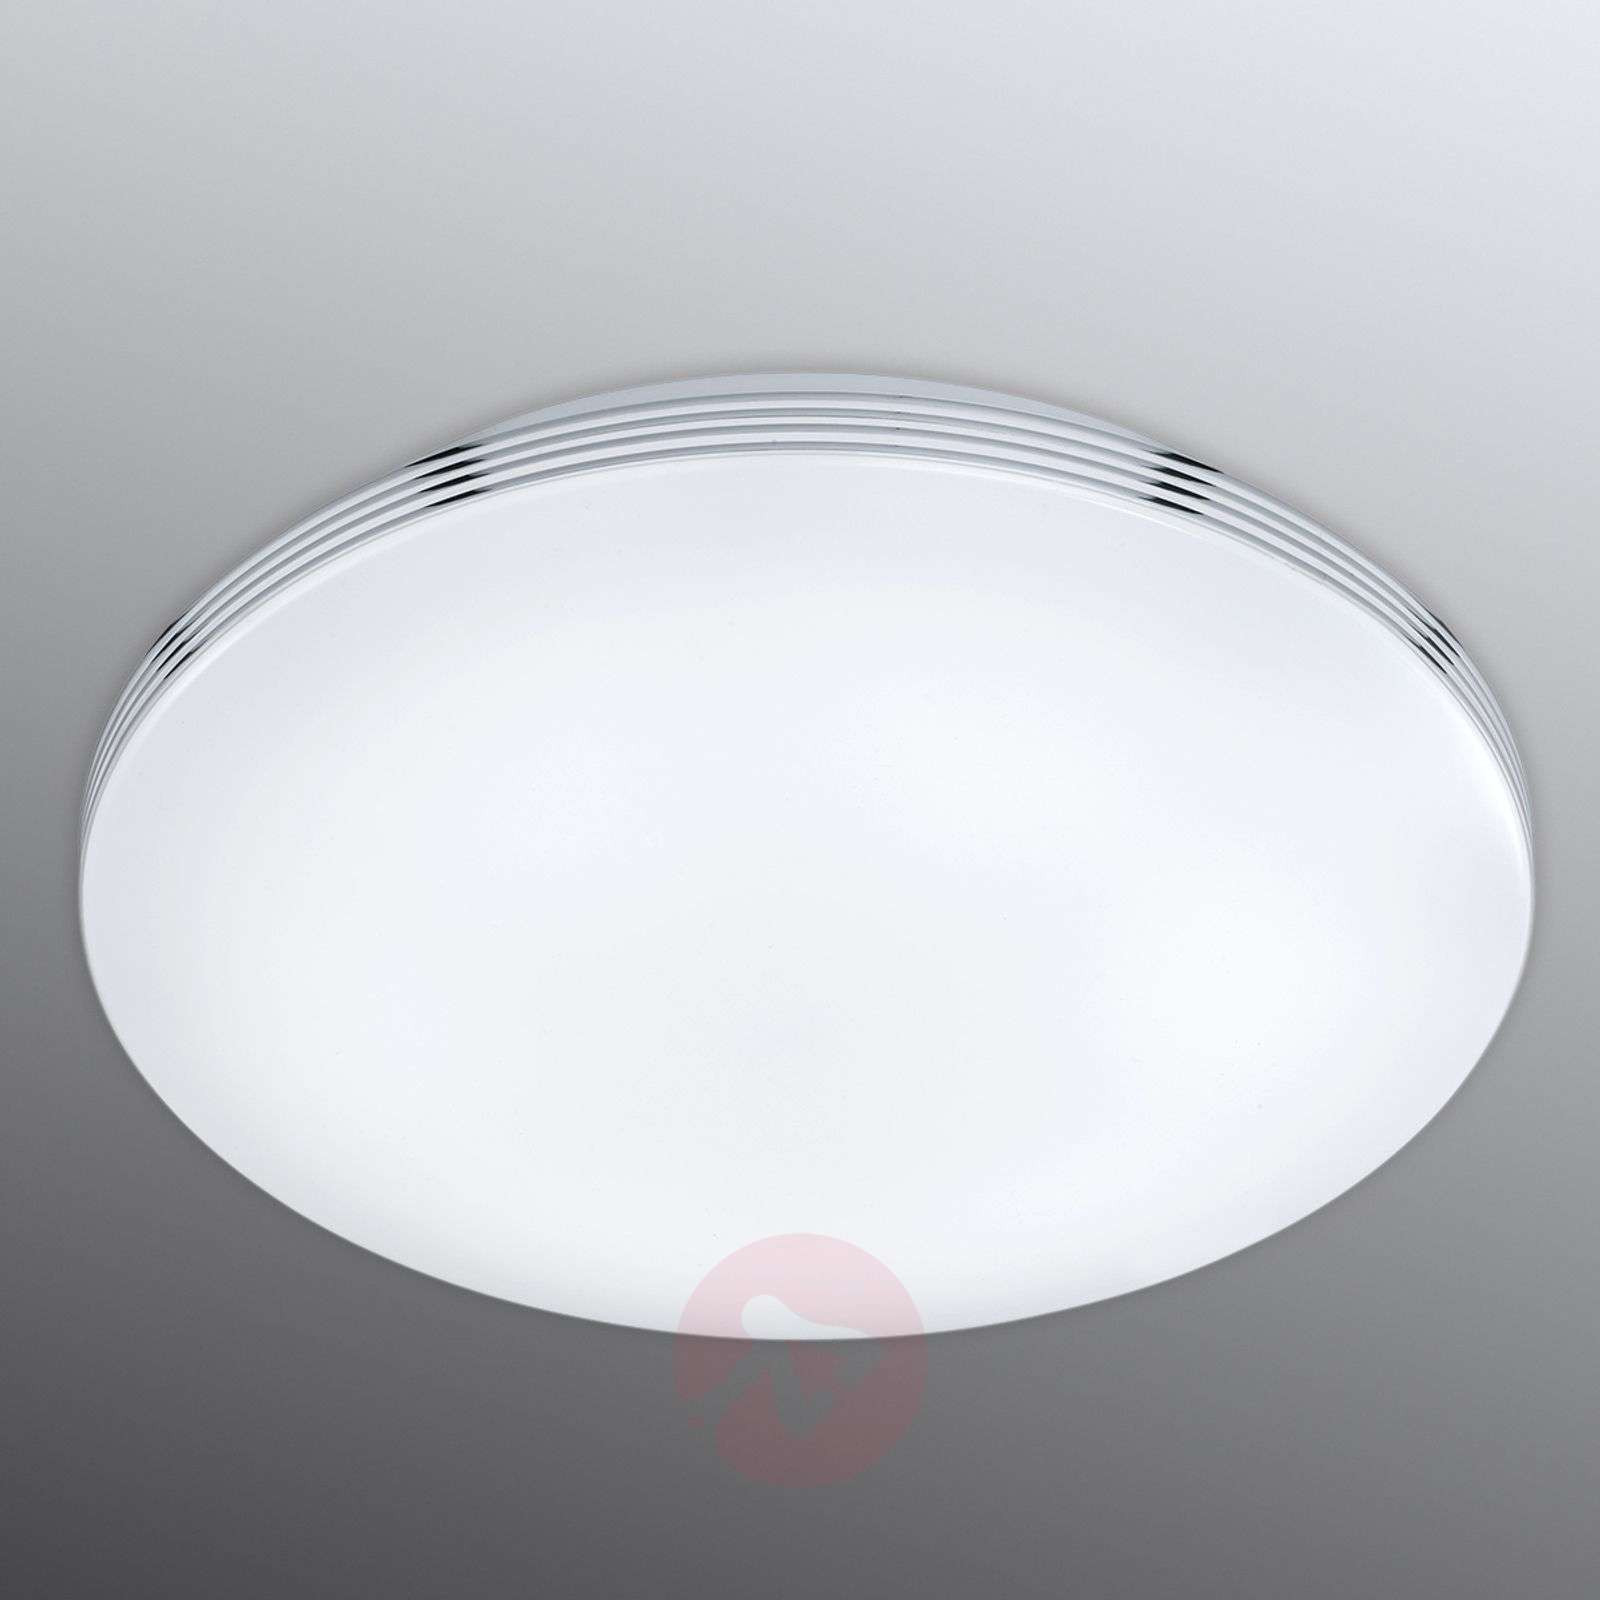 Bathroom Ceiling Light Fixtures
 Dimmable Apart LED bathroom ceiling light